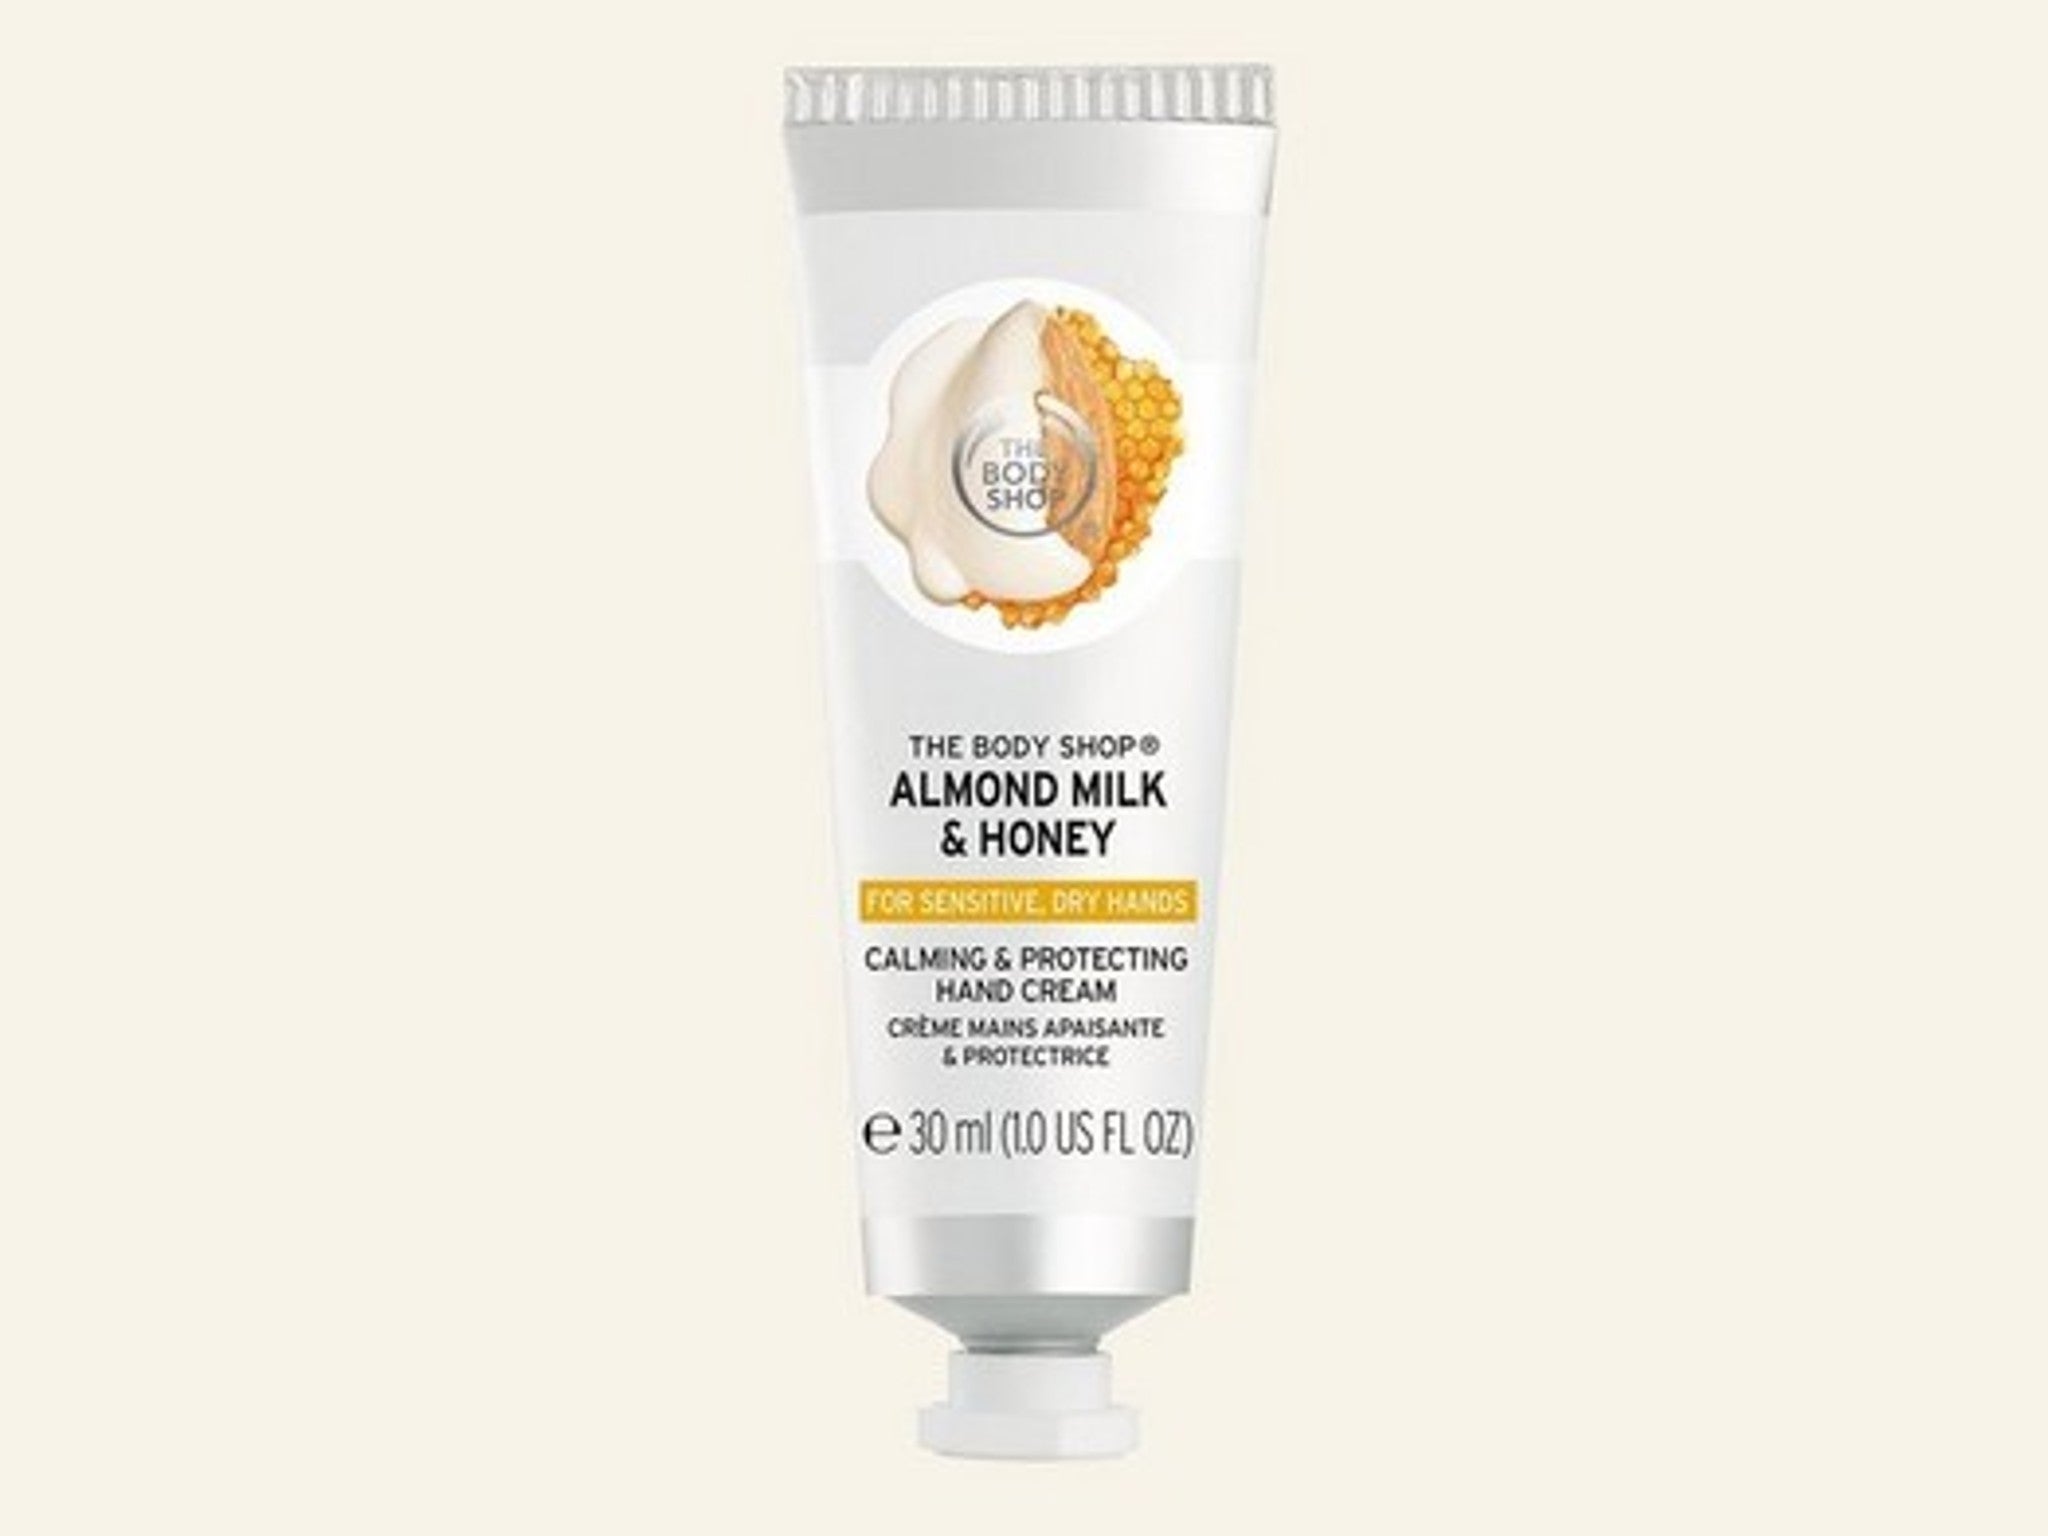 The Body Shop almond milk and honey calming and protecting hand cream indybest.jpeg